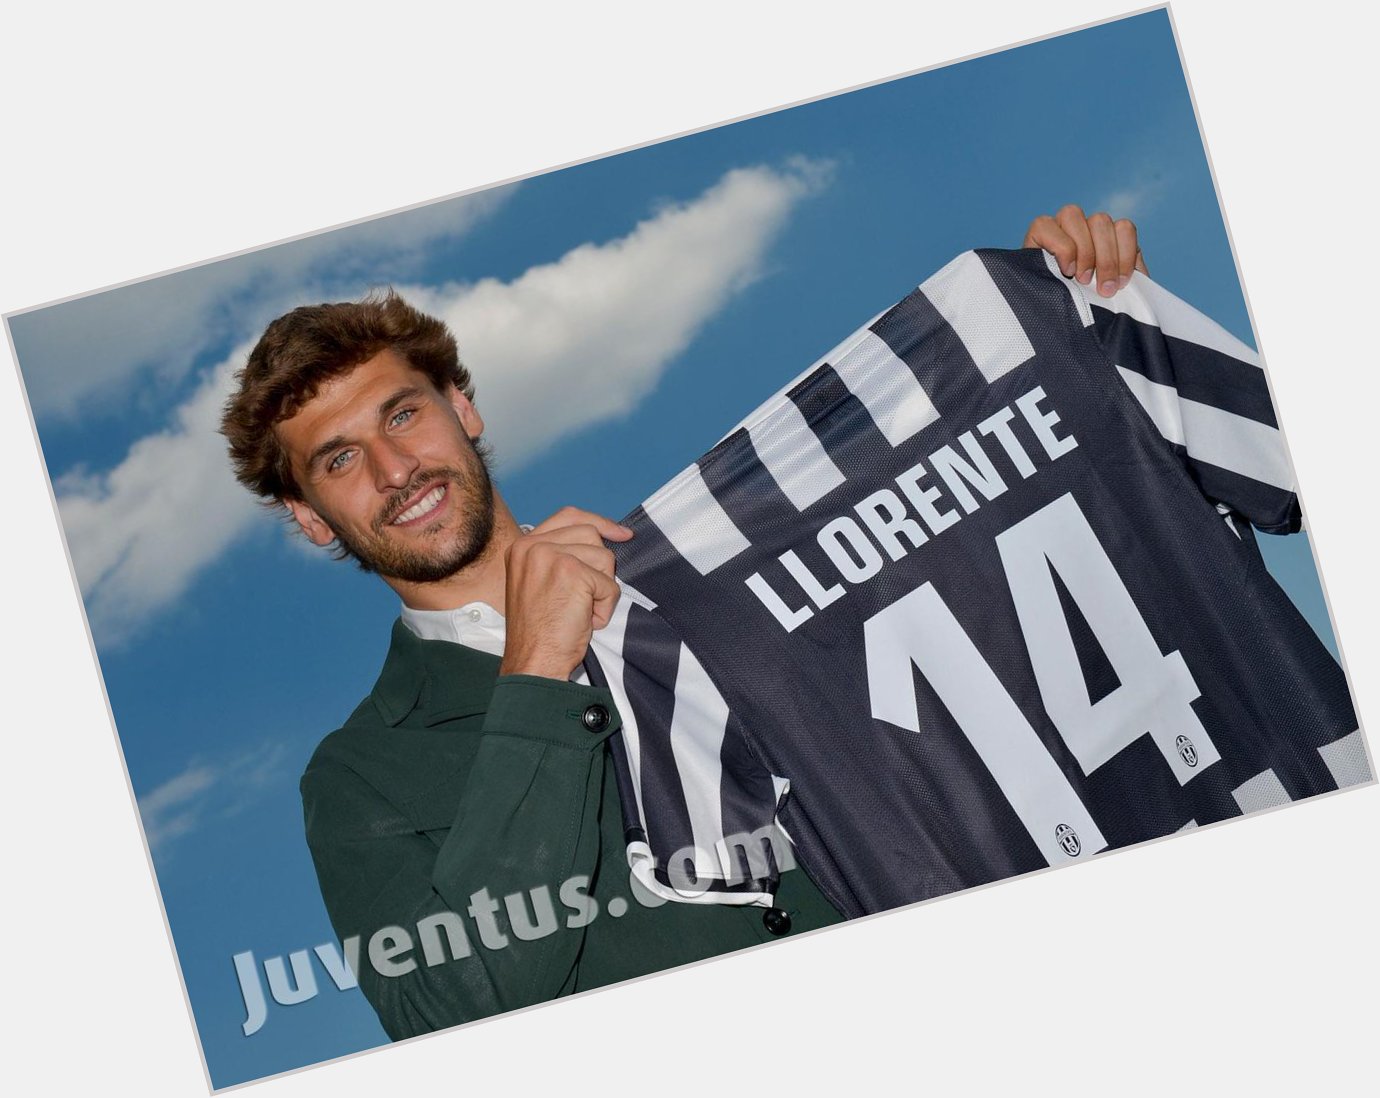 Happy 30th Birthday...Juventus Forward Fernando Llorente. He has made 73 Appearances and scored 24 Goals. 